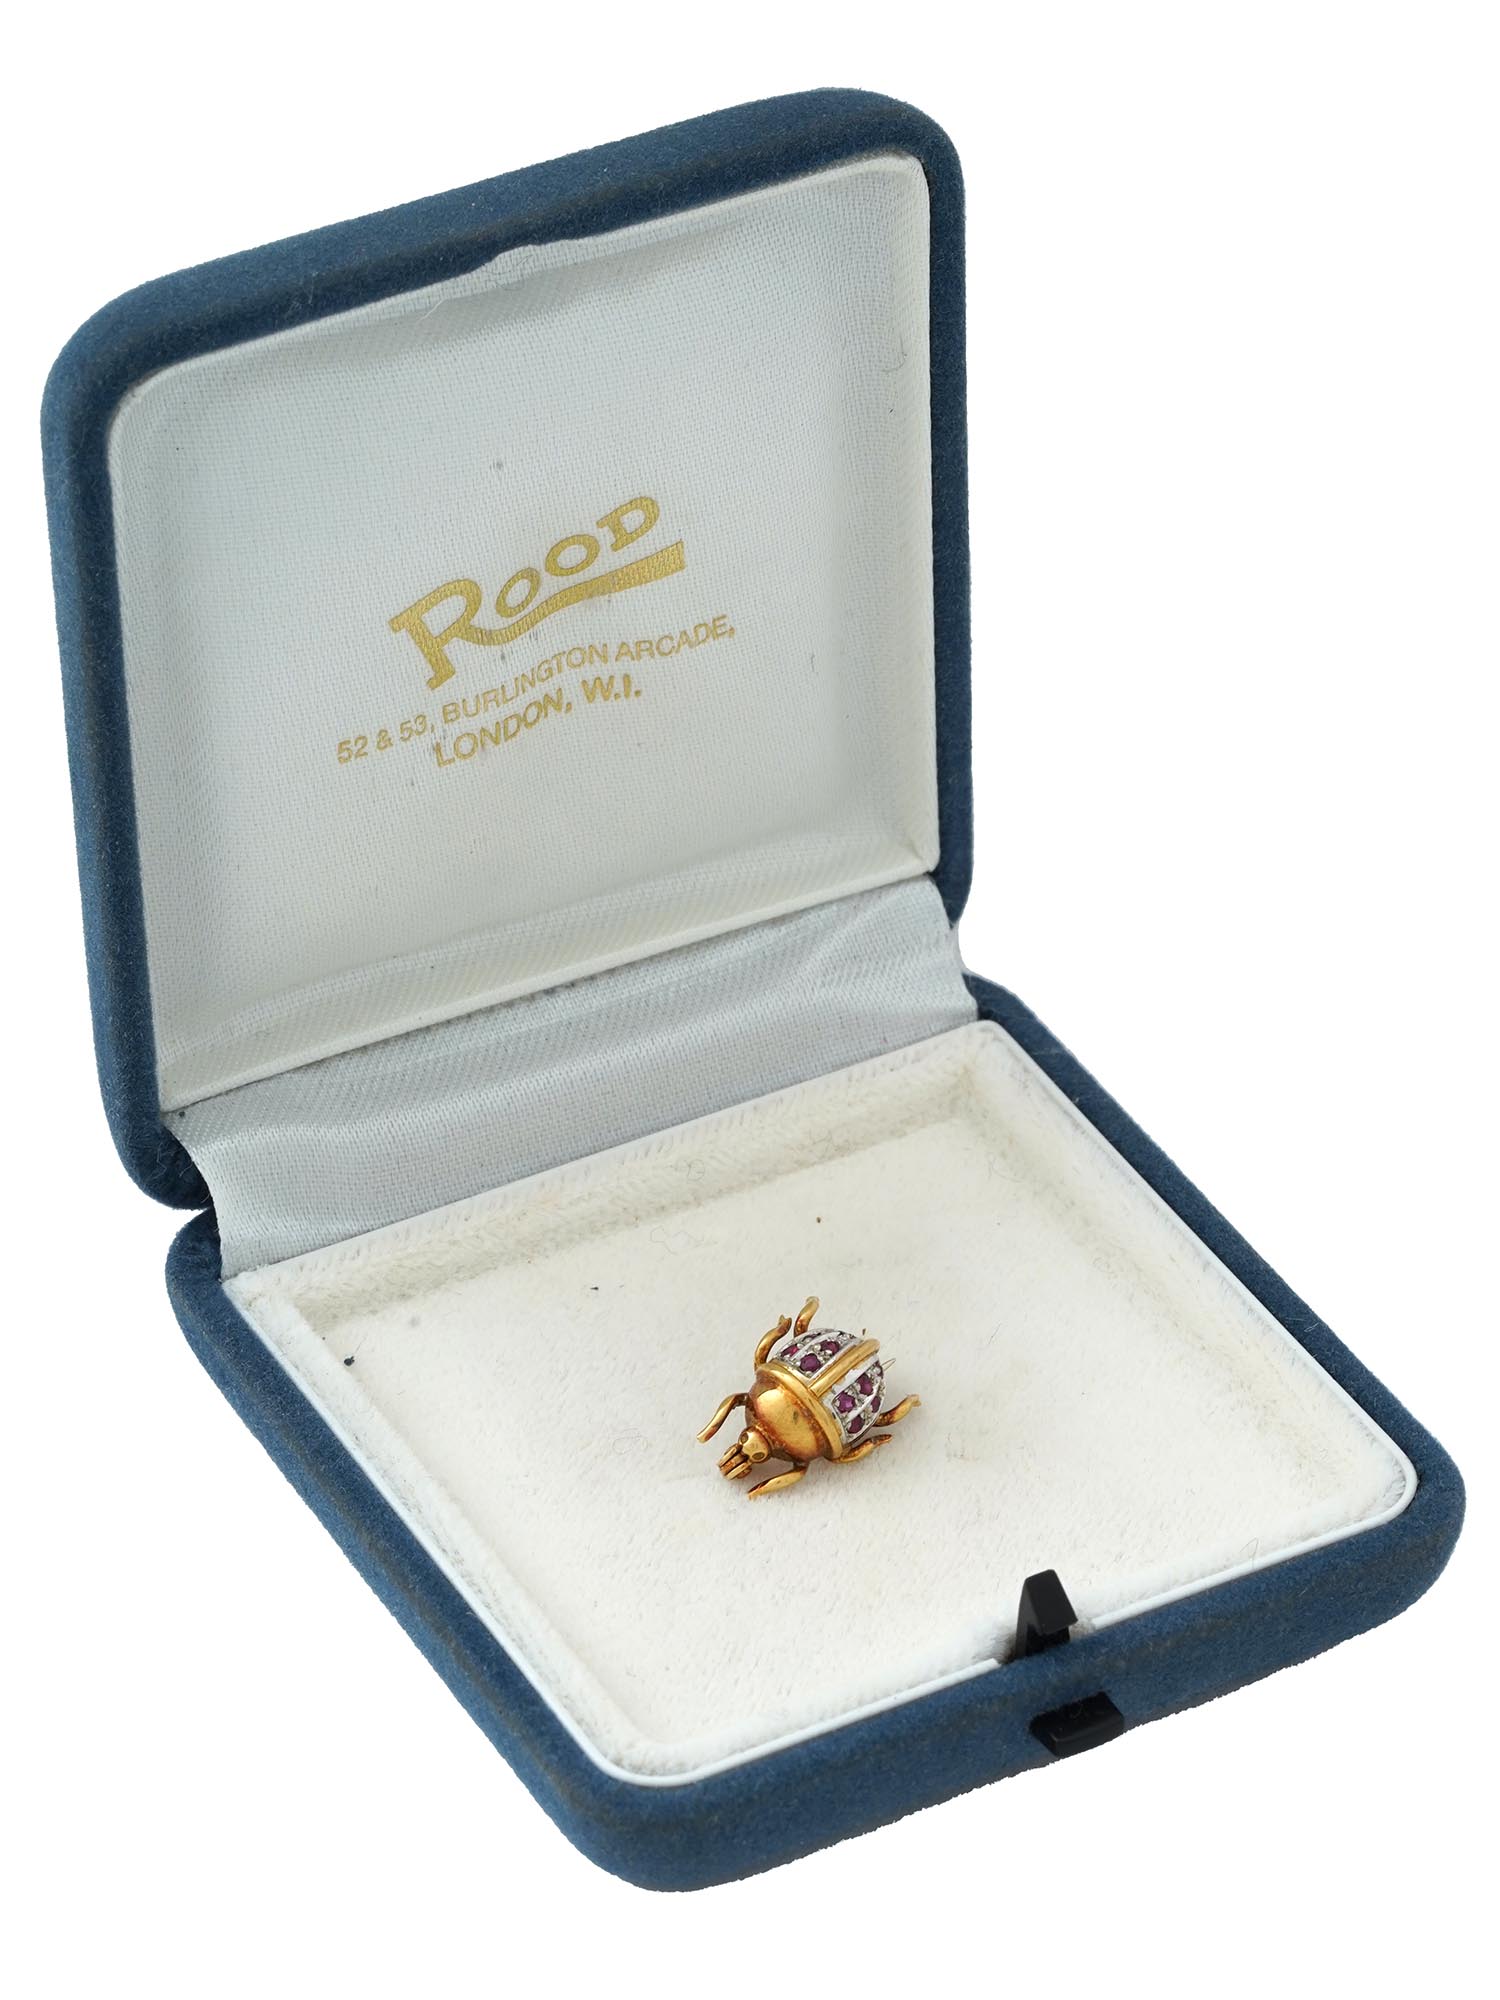 MIDCENT MINIATURE 18K YELLOW GOLD RUBY BUG BROOCH PIC-0